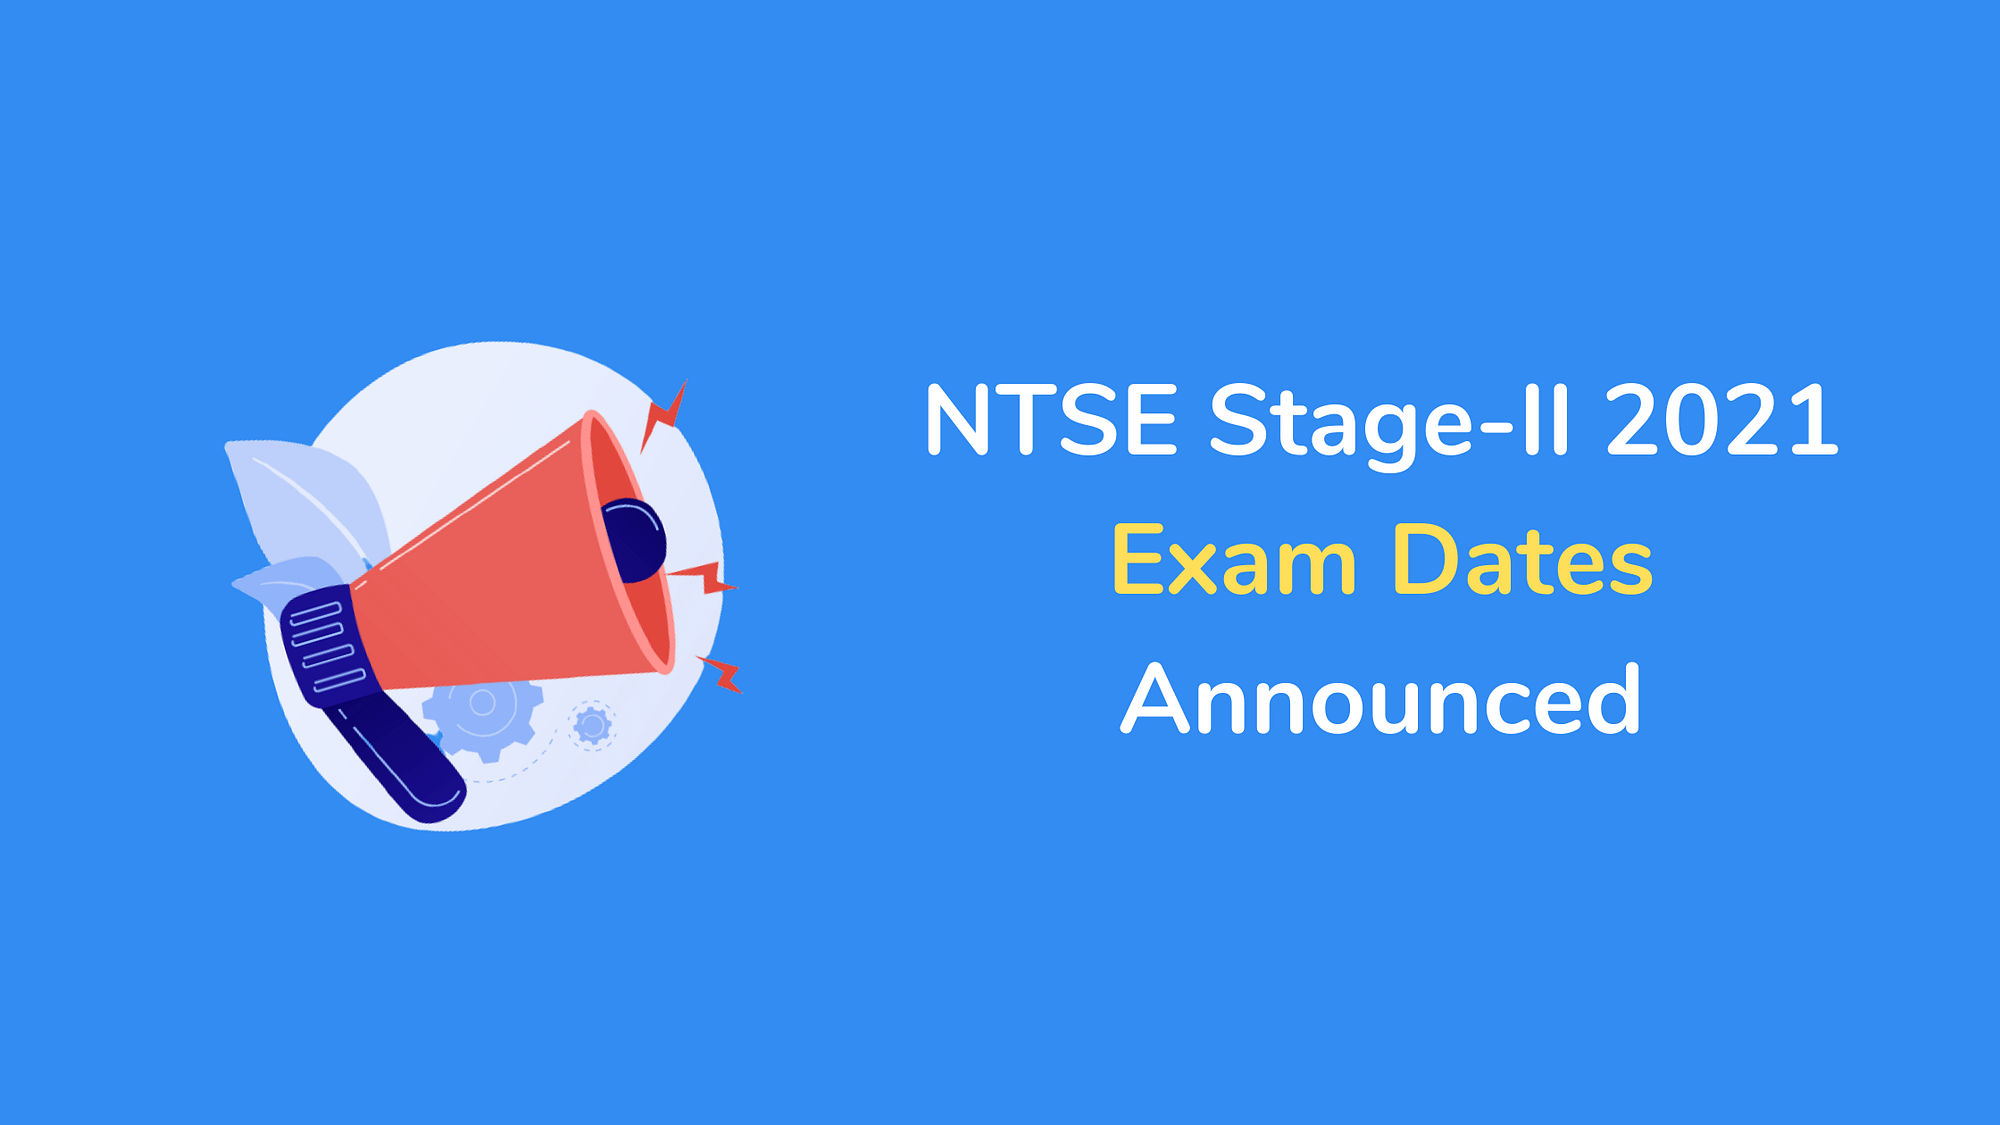 NCERT announces NTSE 2021 Stage 2 Exam Date,